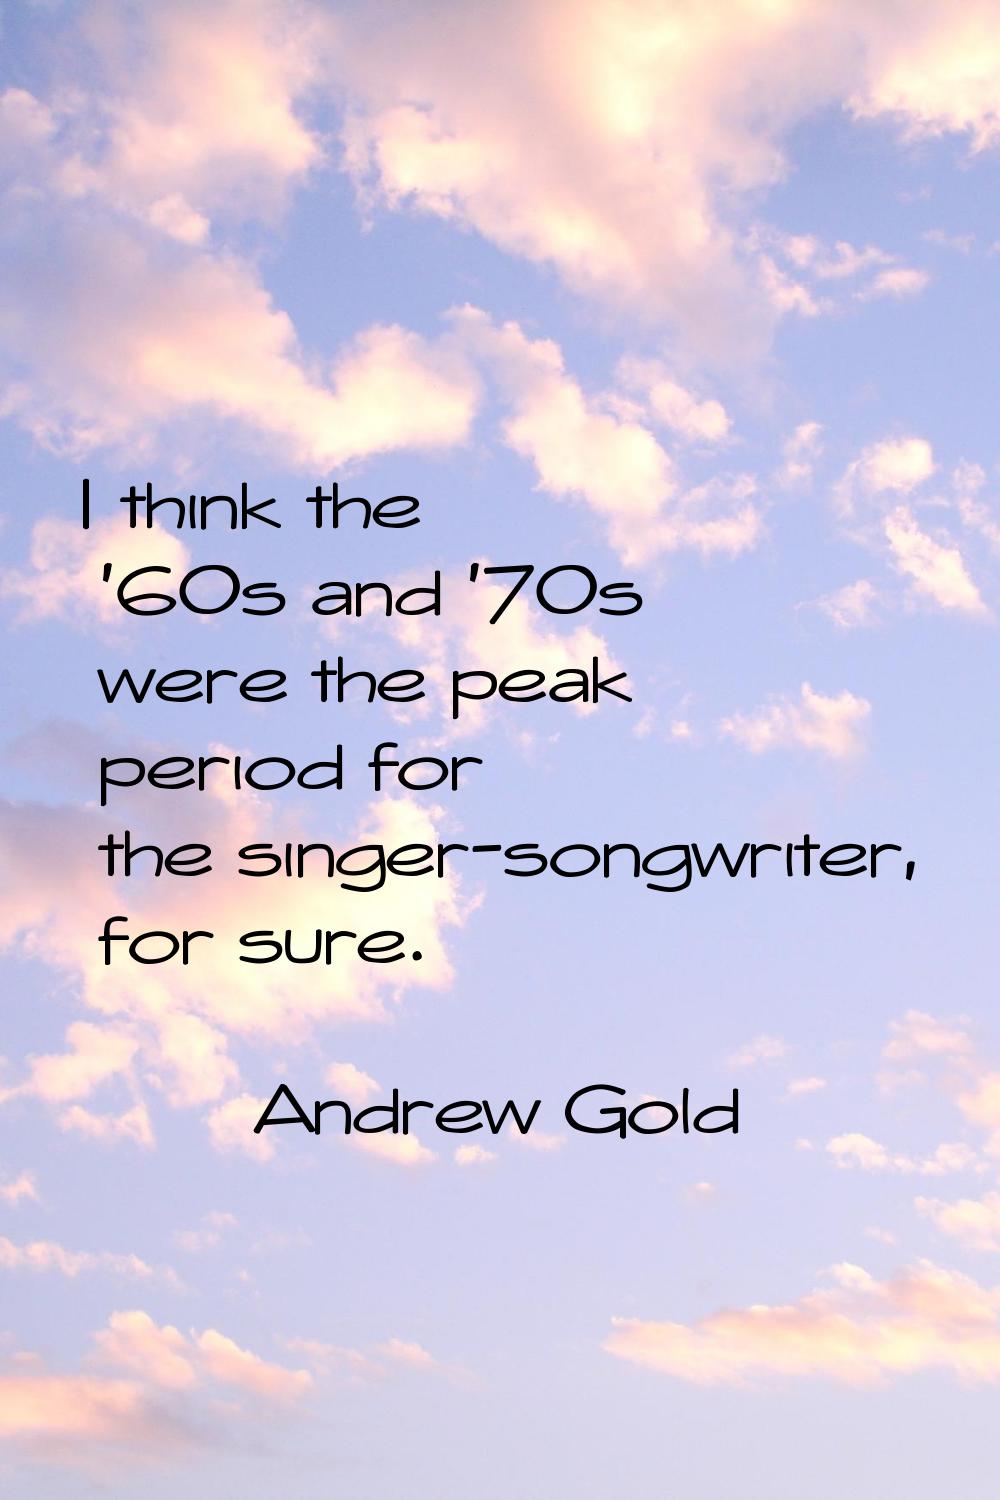 I think the '60s and '70s were the peak period for the singer-songwriter, for sure.